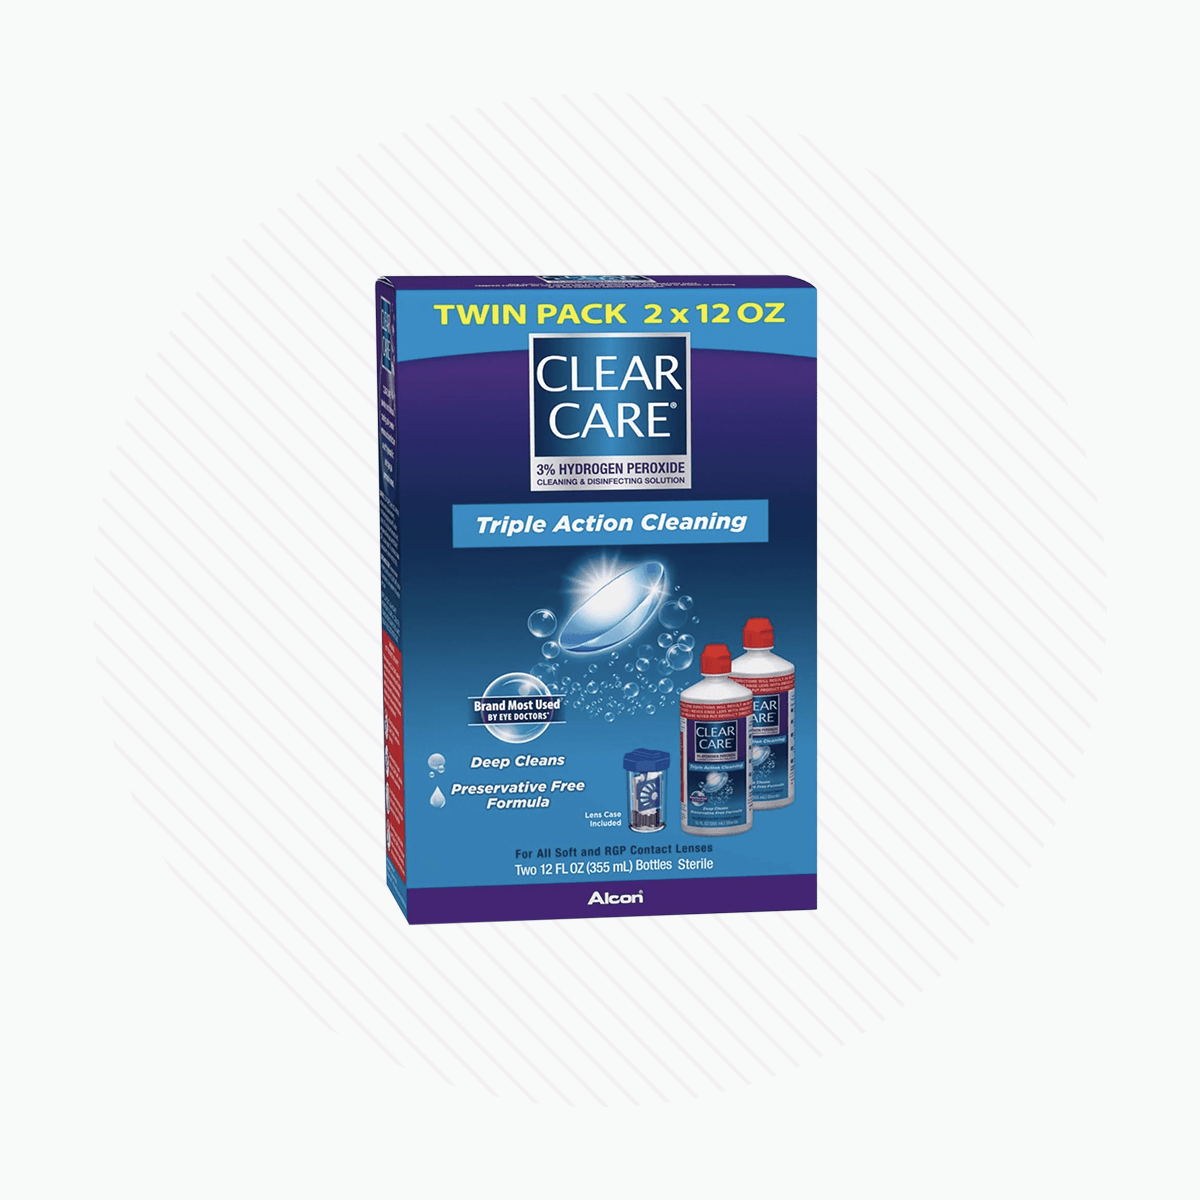 Clear Care Triple Action Cleaning and Disinfecting Solution with Case, Twin Pack, Multi, 12 Oz, Pack of 2 - Dryeye Rescue